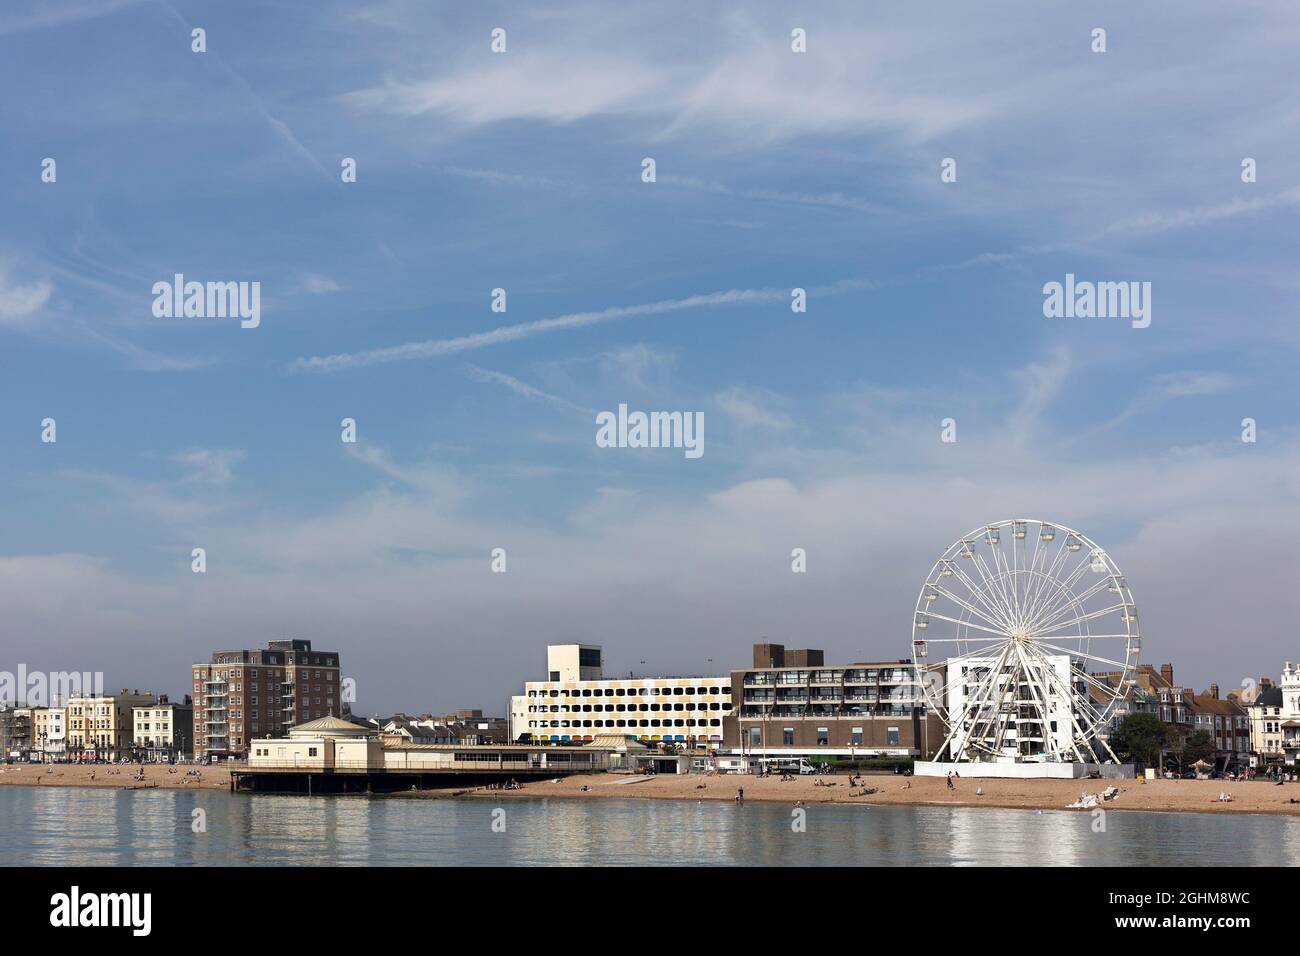 worthing seafront from the pier, featuring the observation wheel and the Lido, September 2021 Stock Photo